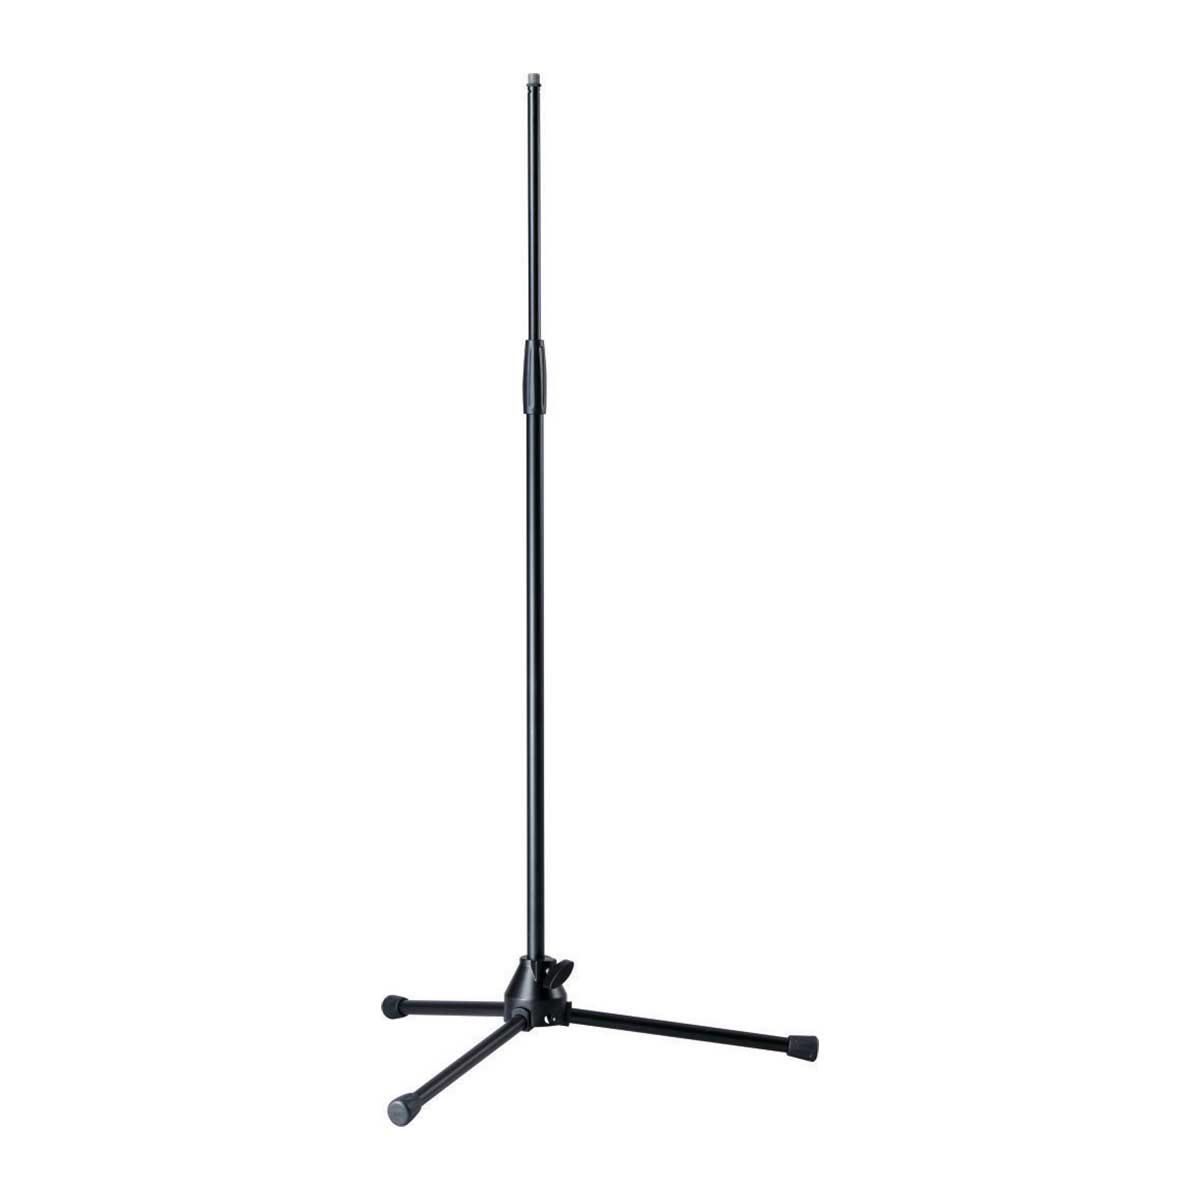 Precision by Triad-Orbit TT Long type straight microphone stand